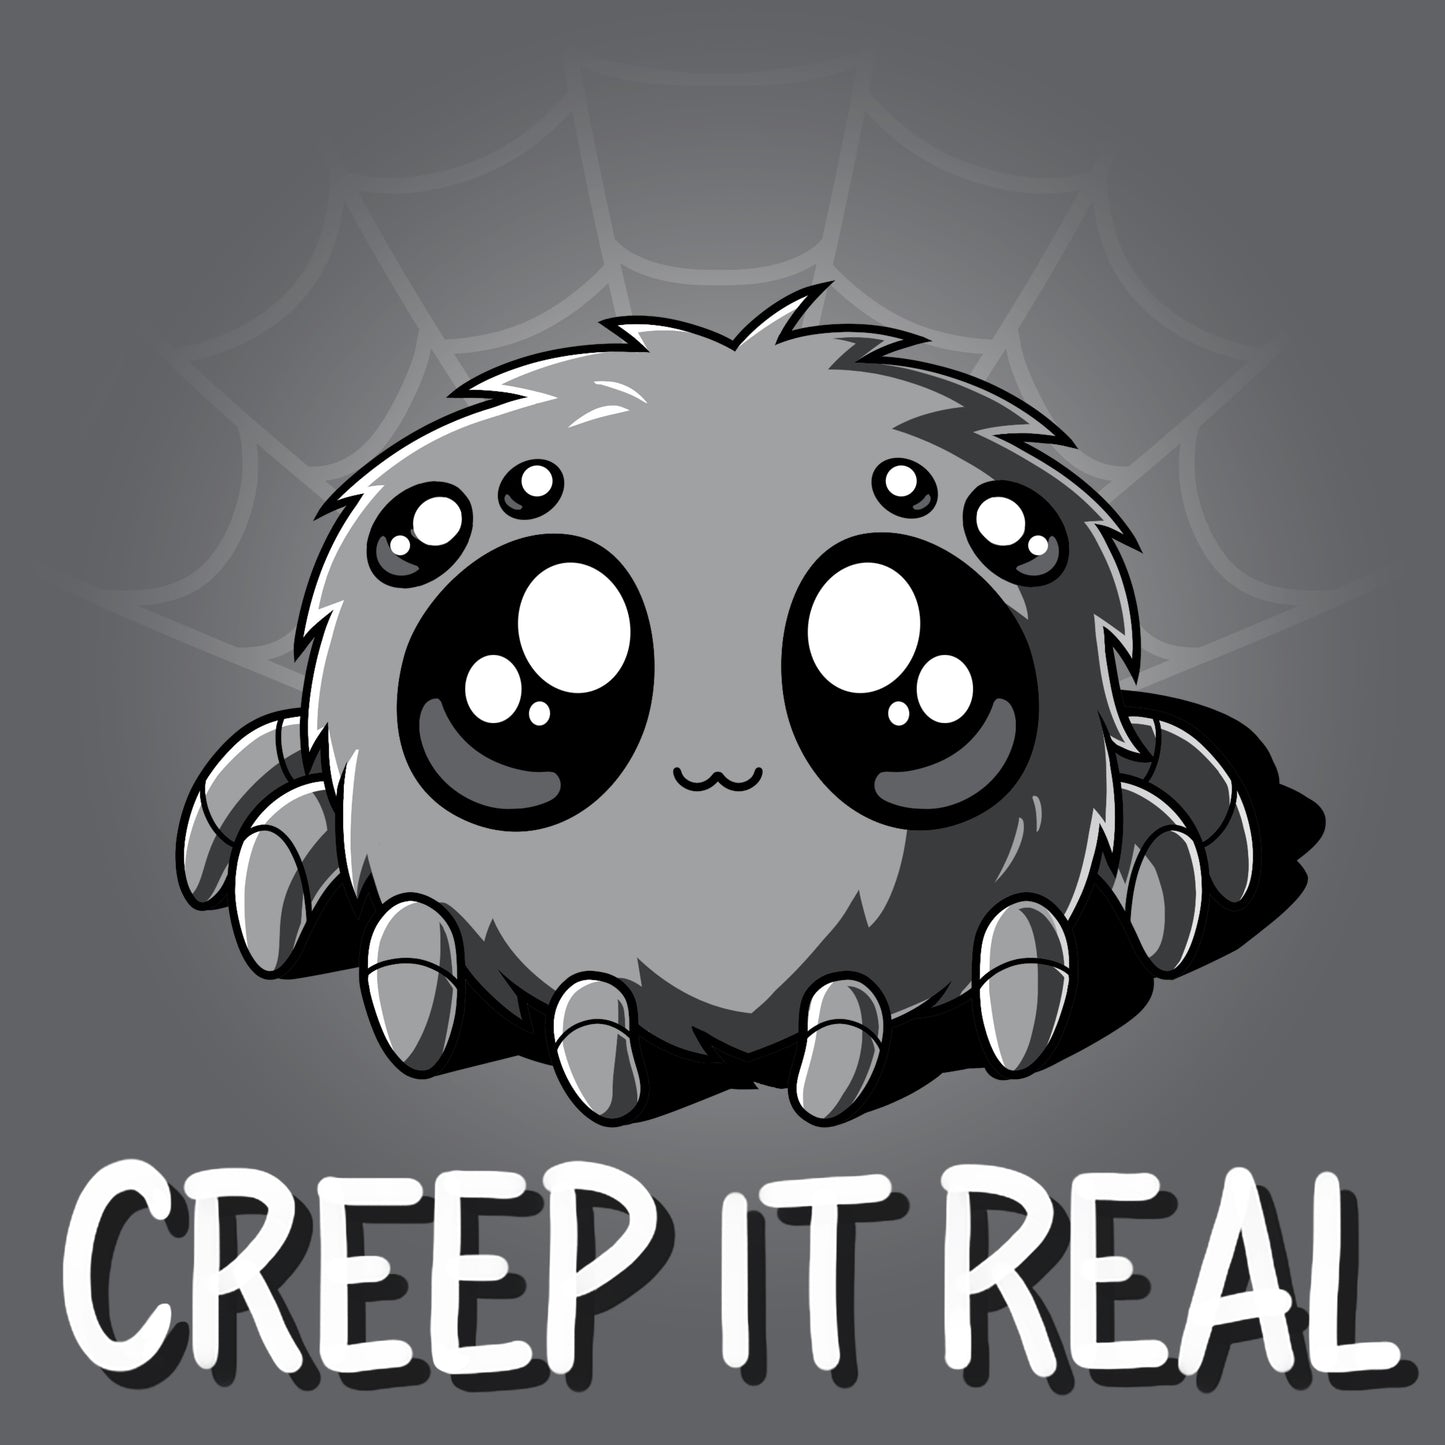 Creepy crawlies meet fluffy on this Creep It Real spider-themed TeeTurtle t-shirt.